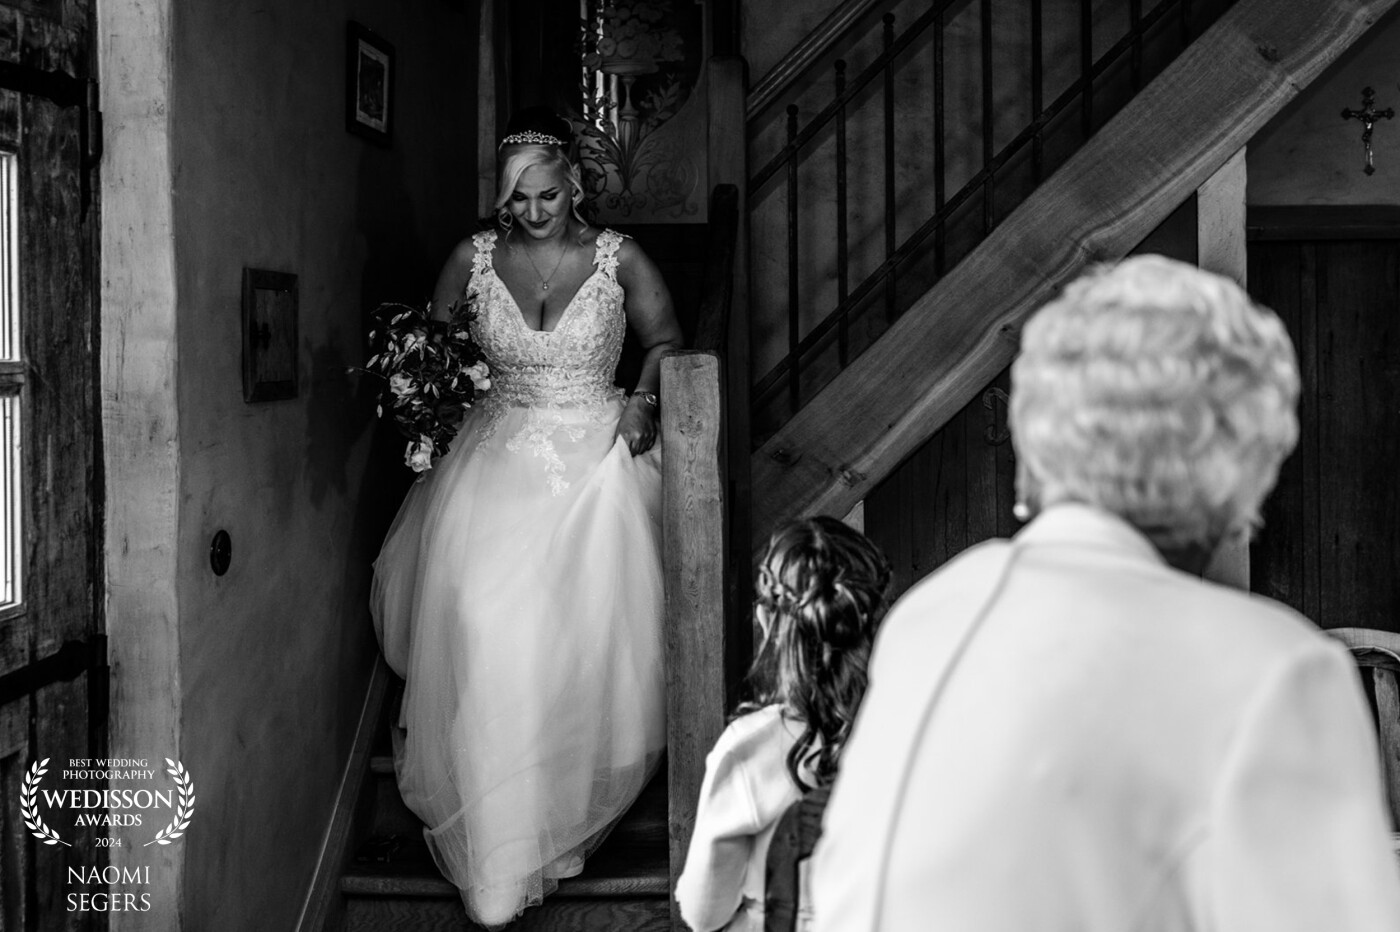 When the bride is ready to meet her future husband and close family members are blown away by her beauty. Short after this moment the first happy tears appeared.